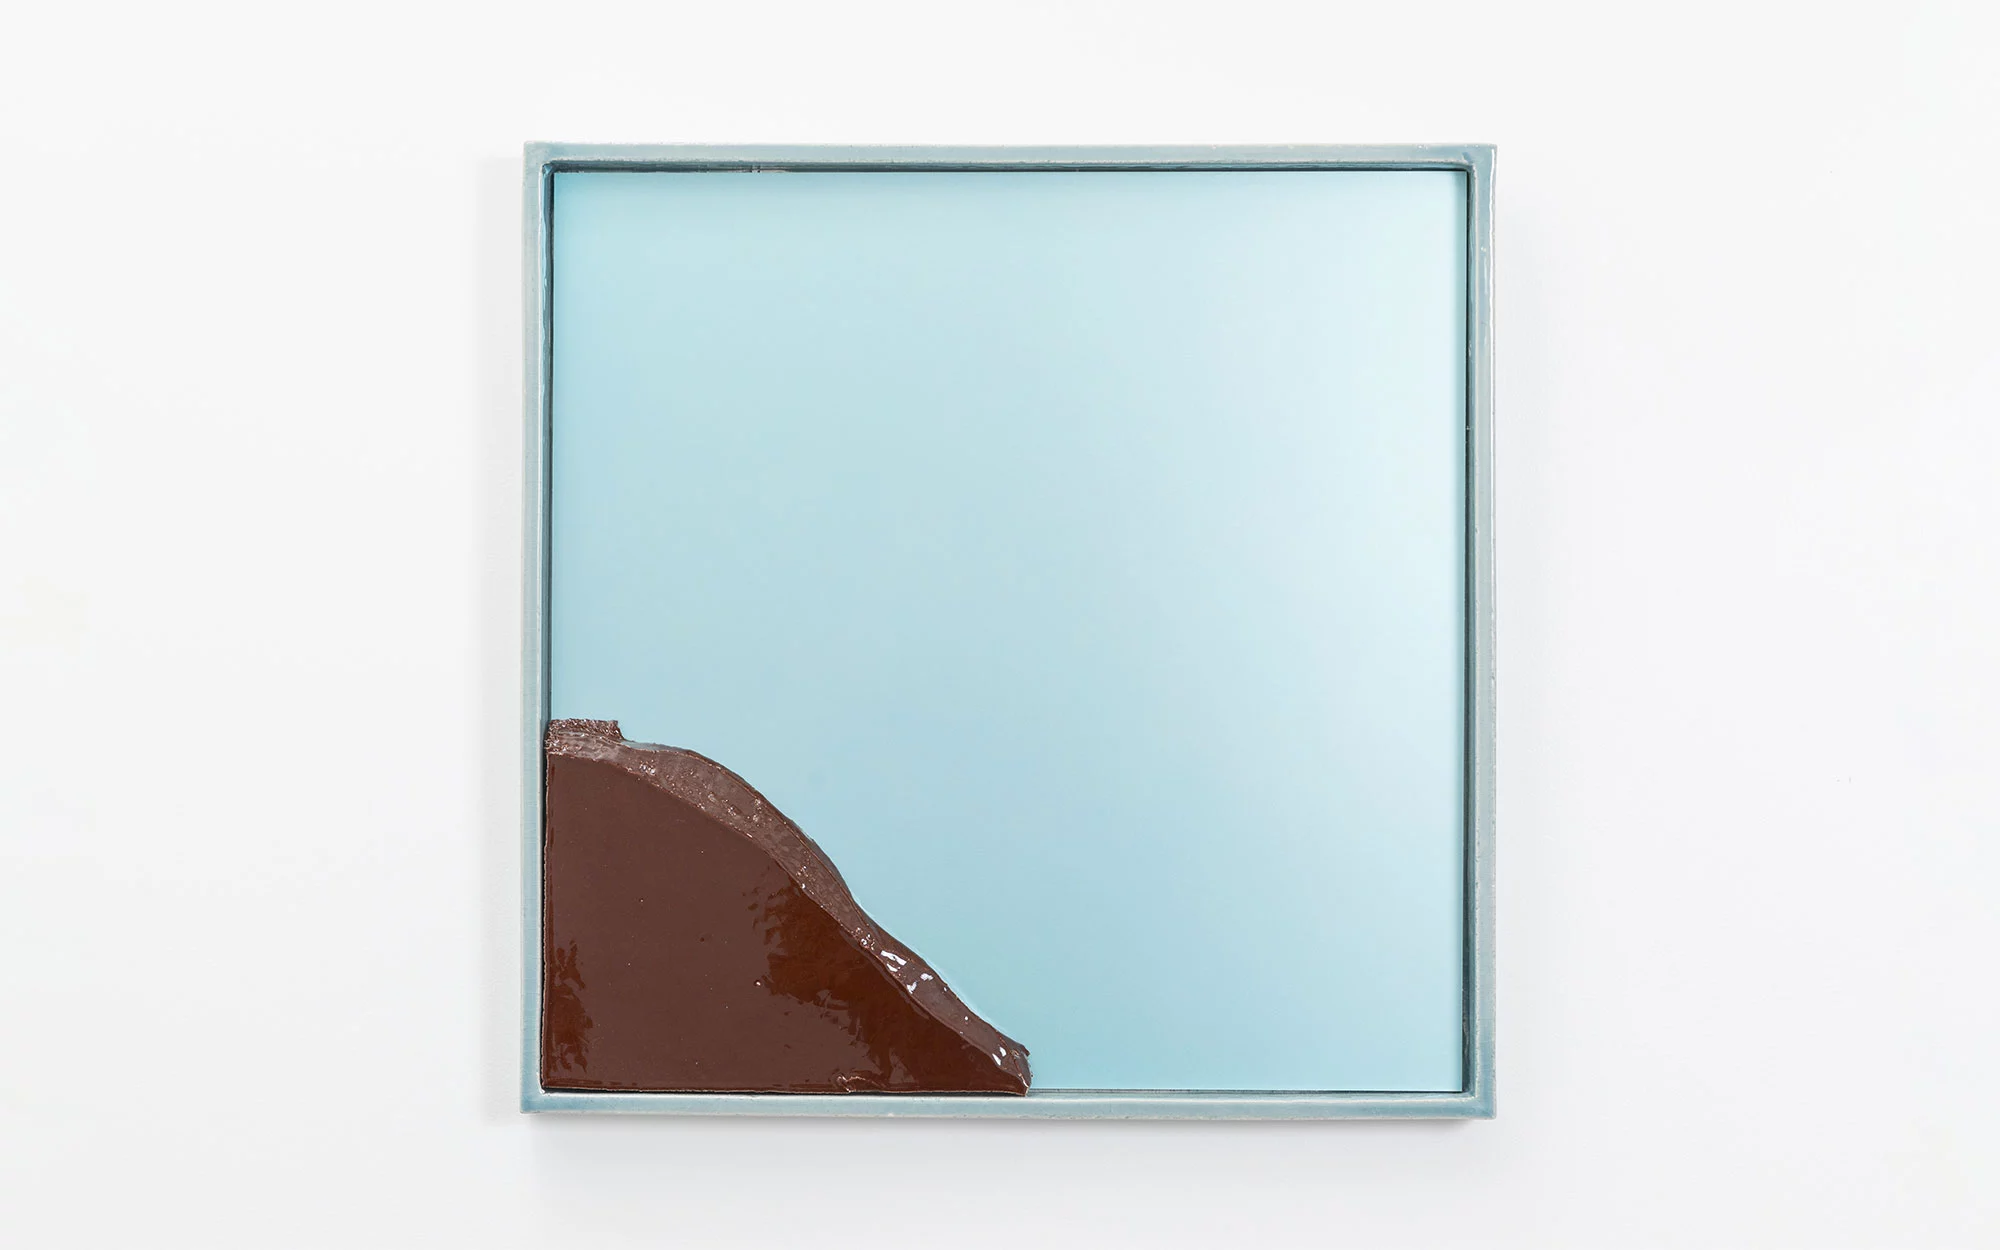 Bas-Relief SQUARE - Ronan Bouroullec - Miscellaneous - Galerie kreo